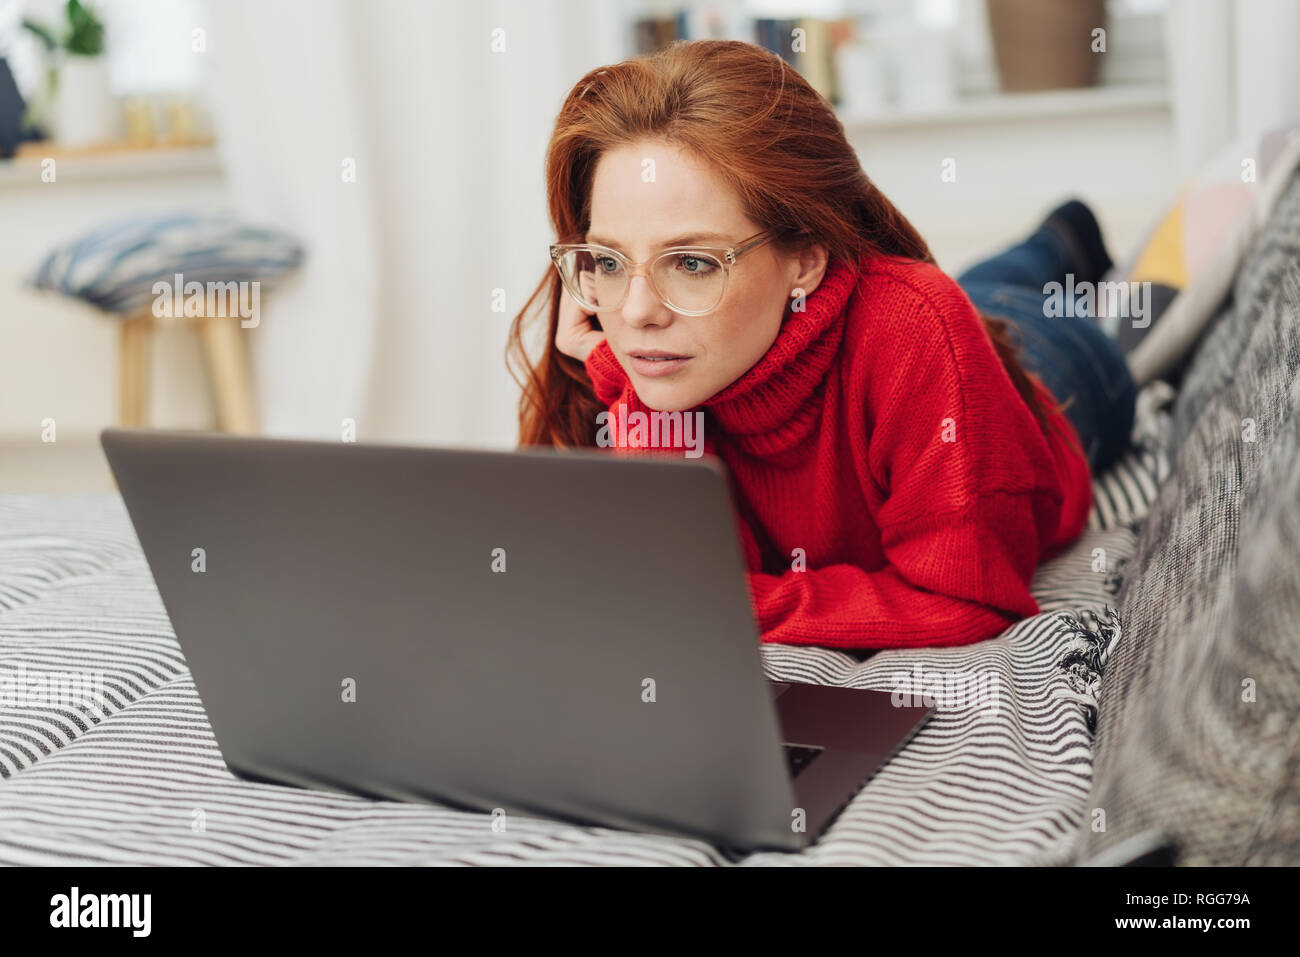 Young Woman Using A Laptop On A Sofa As She Relaxes With Her Feet Up 